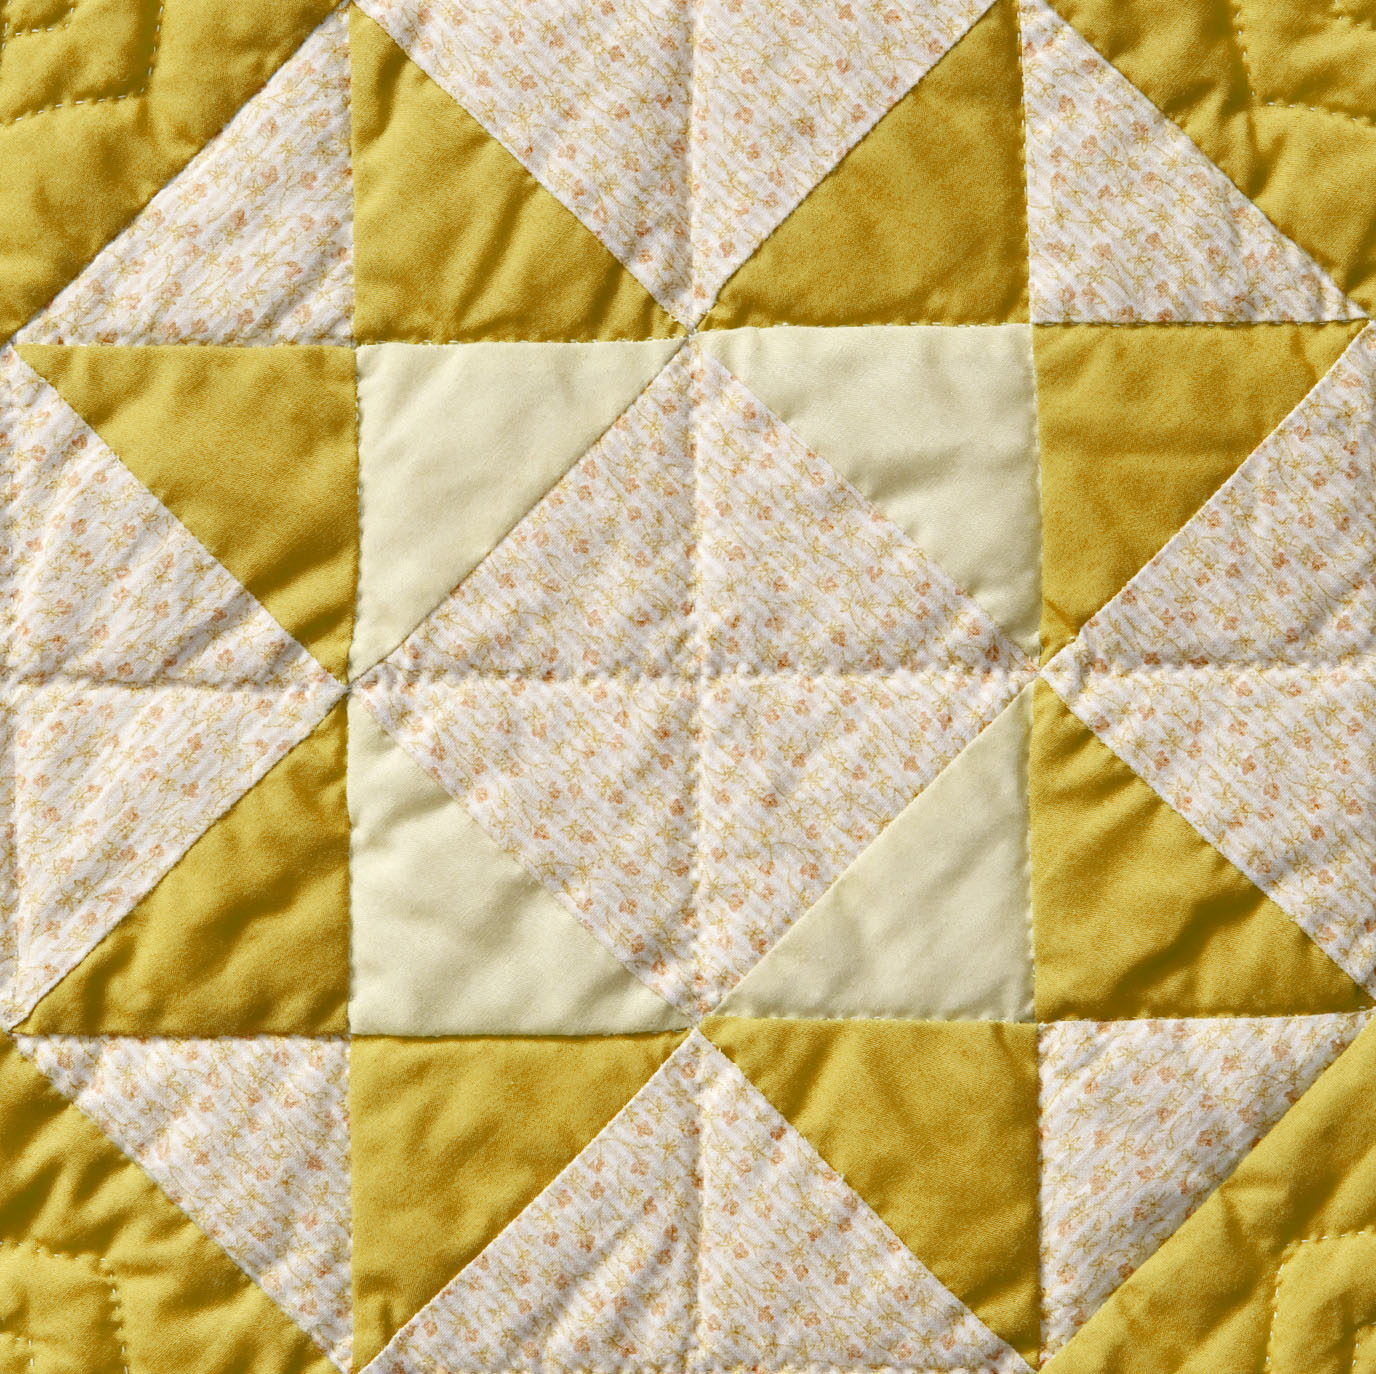 Amish patterned quilt